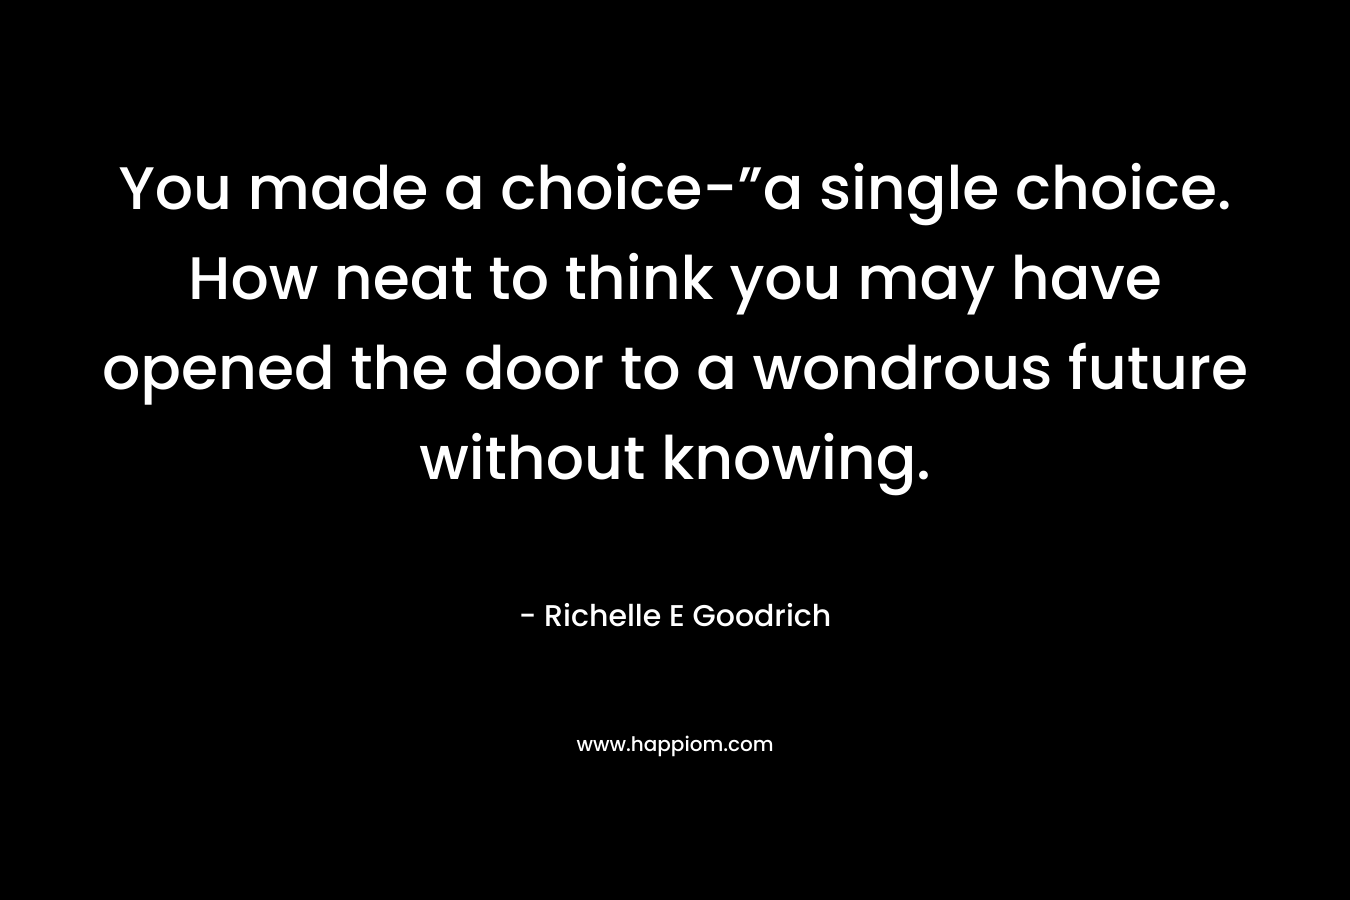 You made a choice-”a single choice. How neat to think you may have opened the door to a wondrous future without knowing.